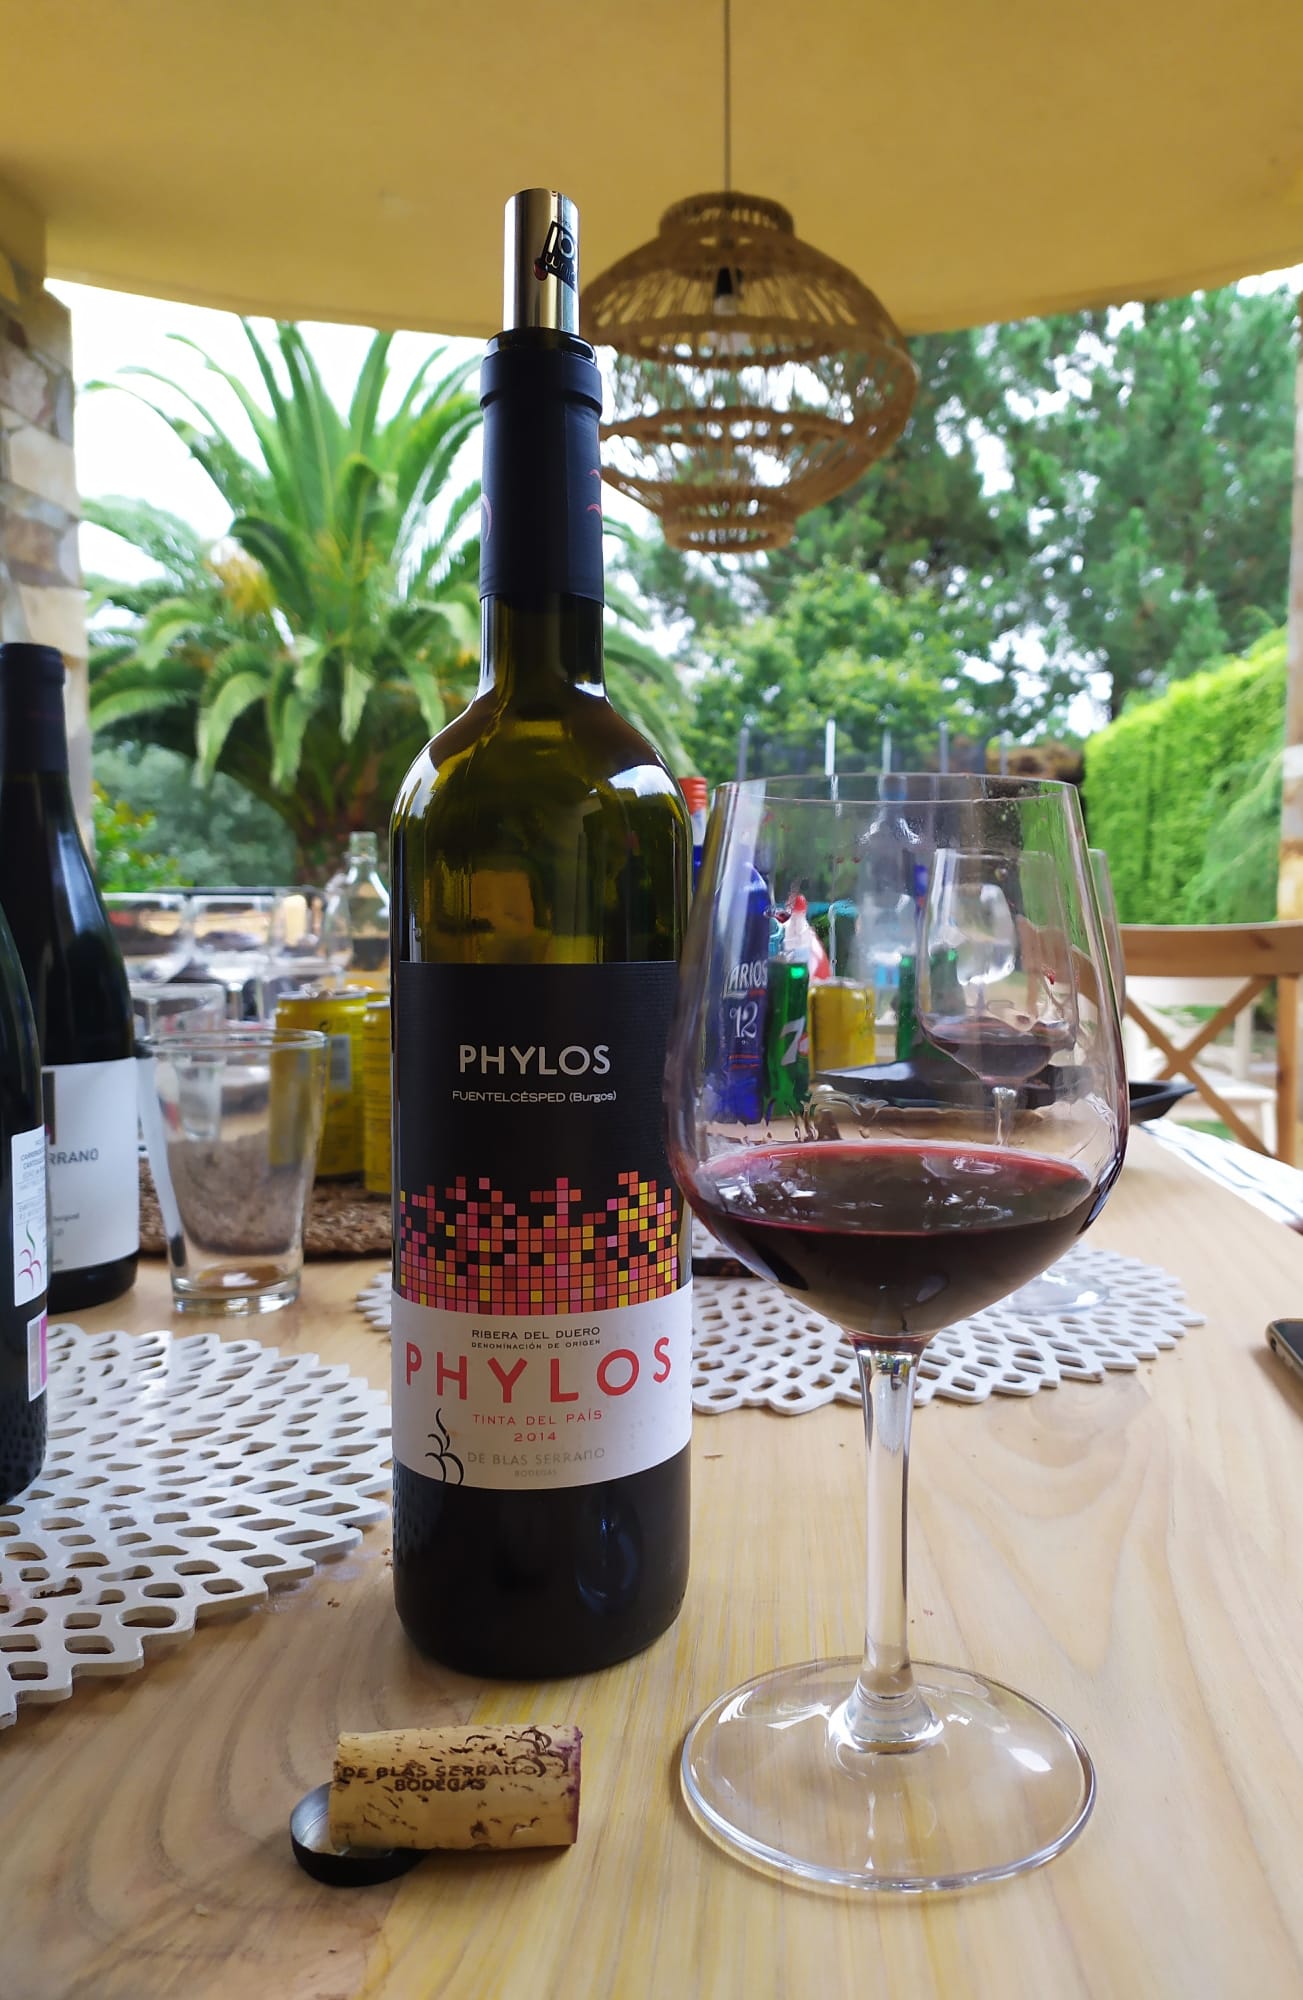 Phylos 2014